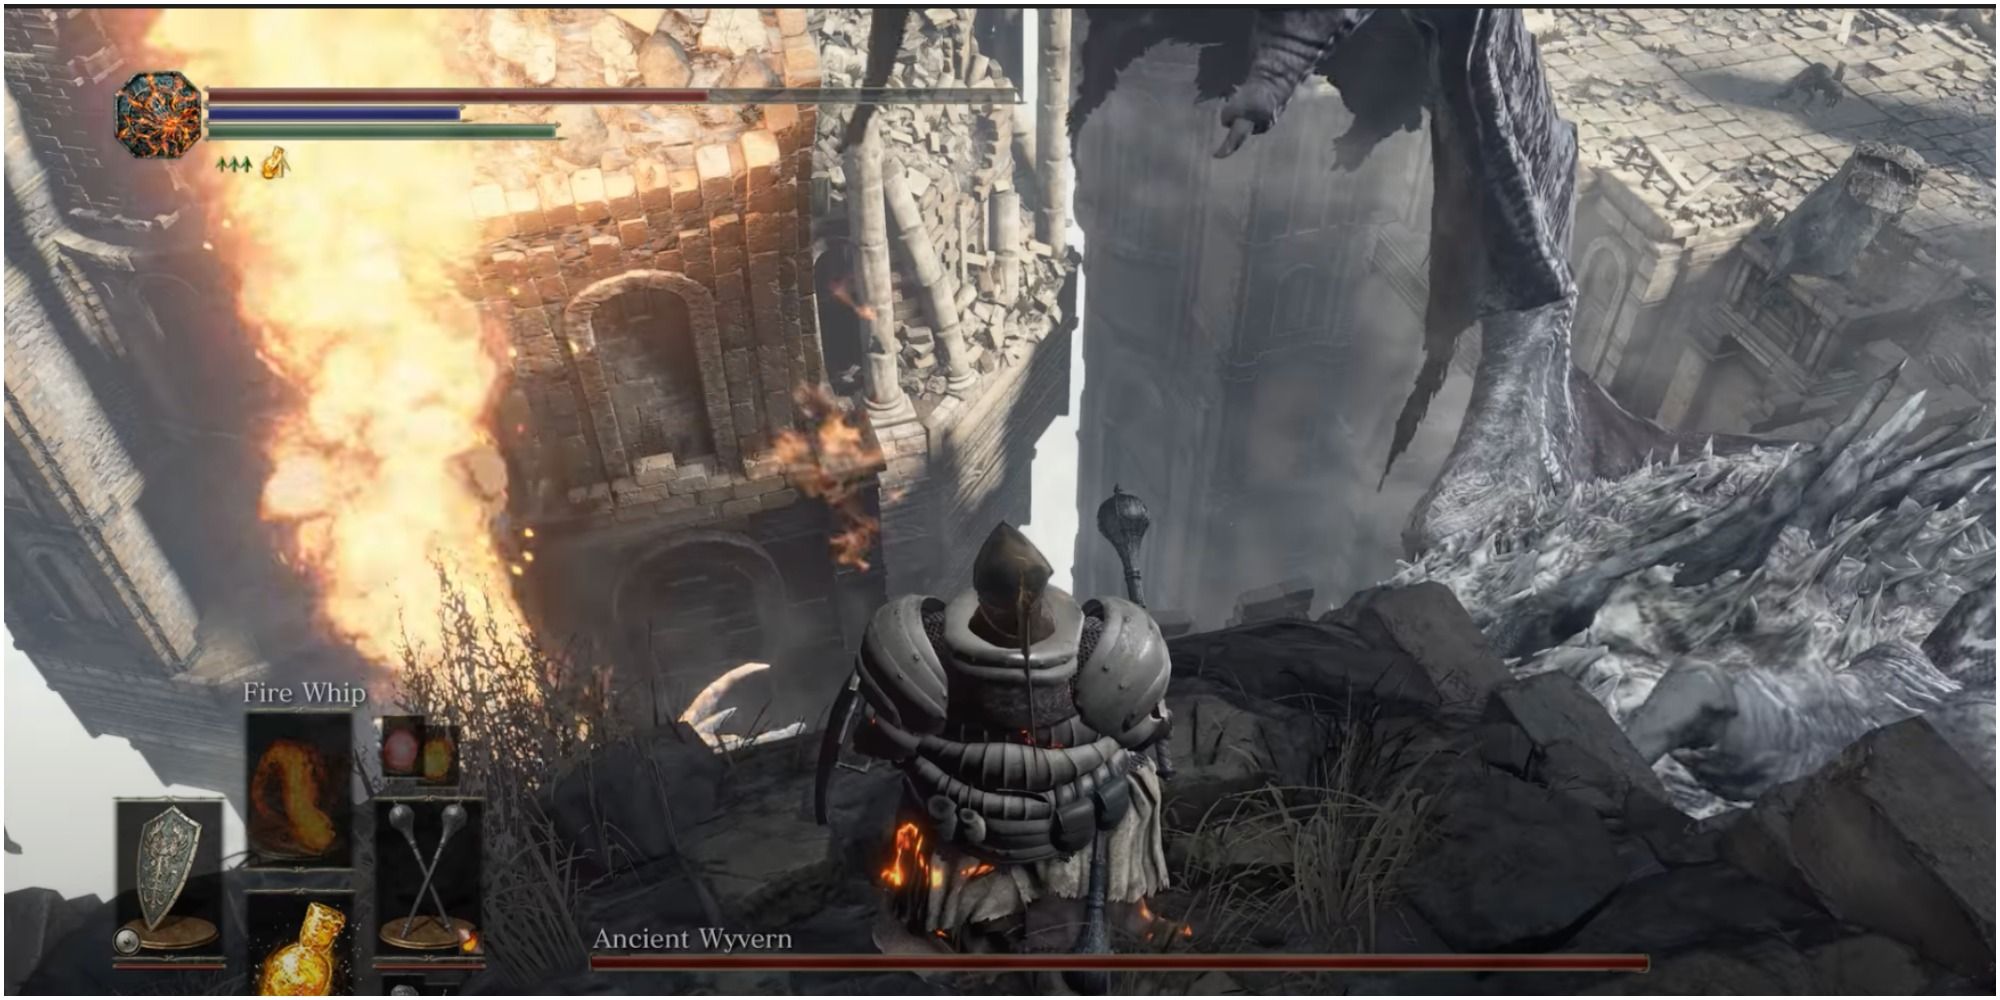 Dark Souls 3 Ancient Wyvern is a hide-and-seek boss fight